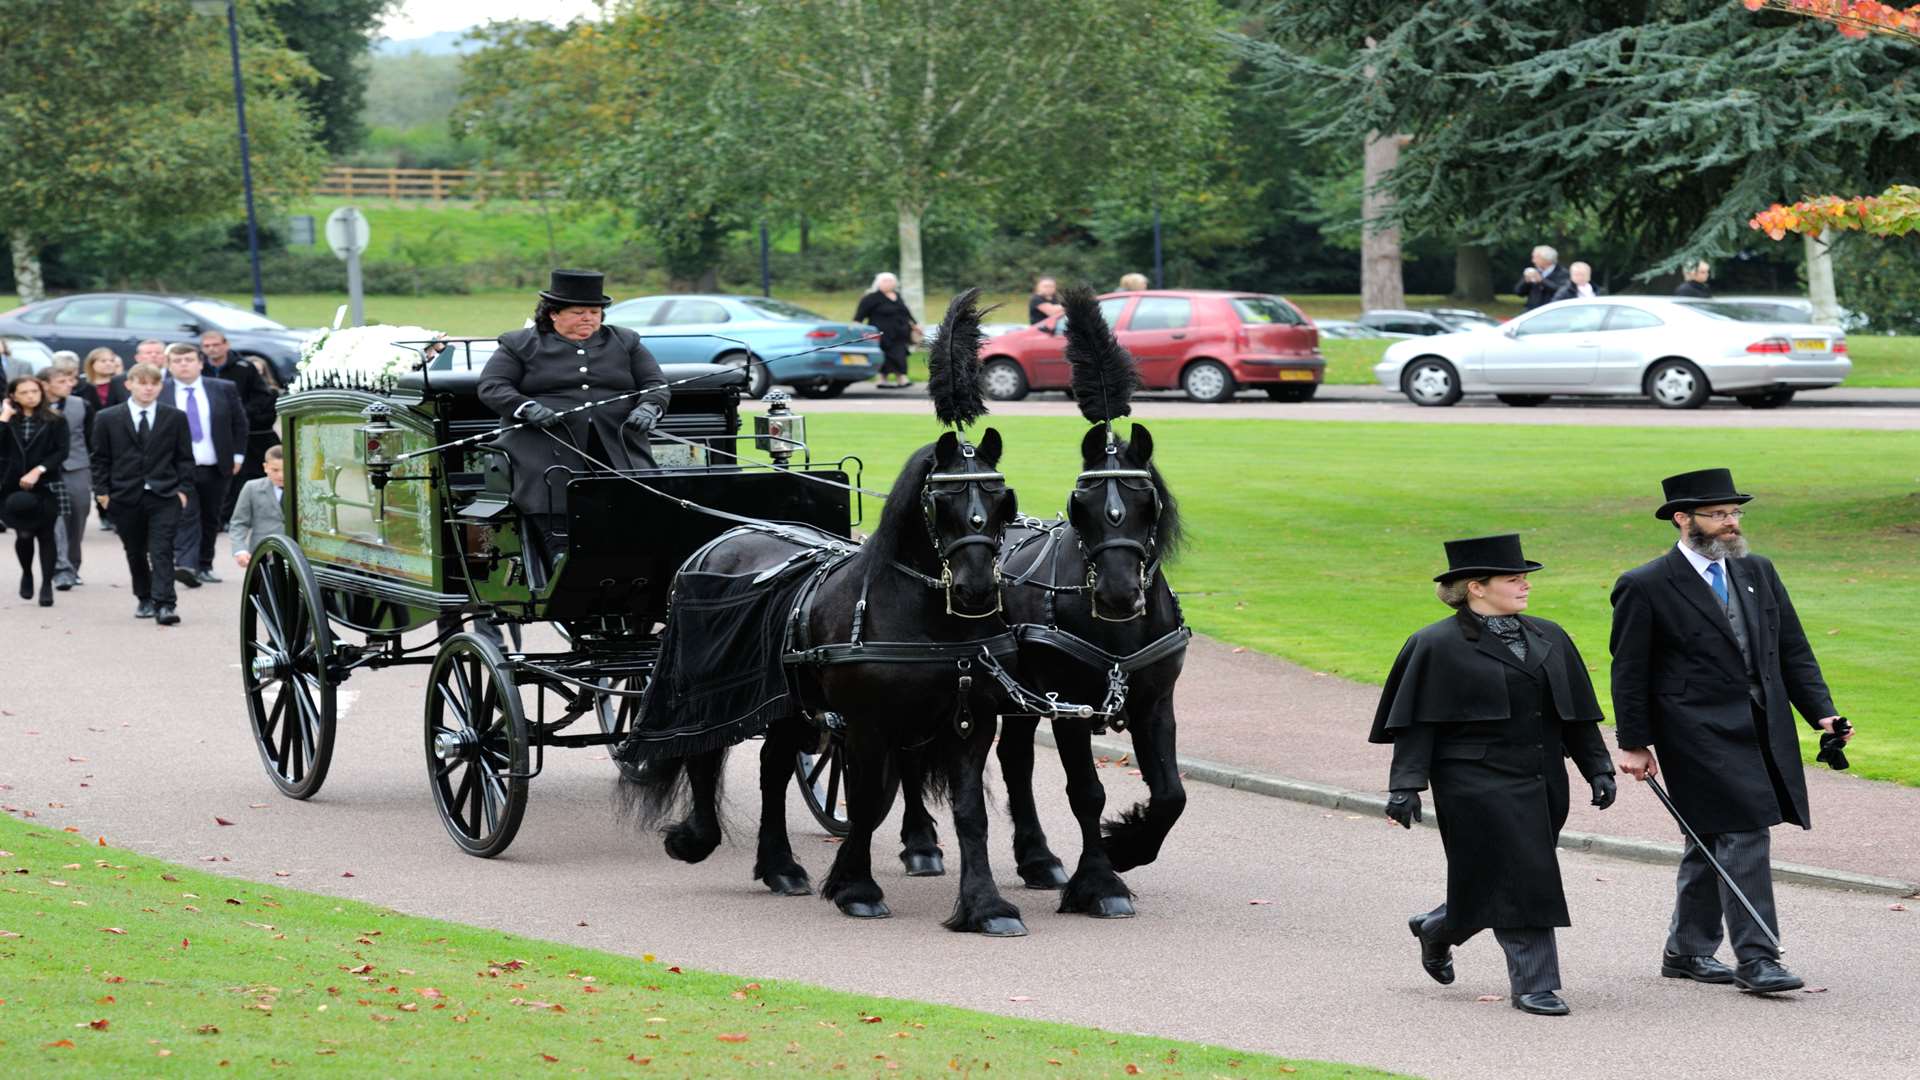 The processions arrives at the Vinters Park Crematorium, Bearsted Road